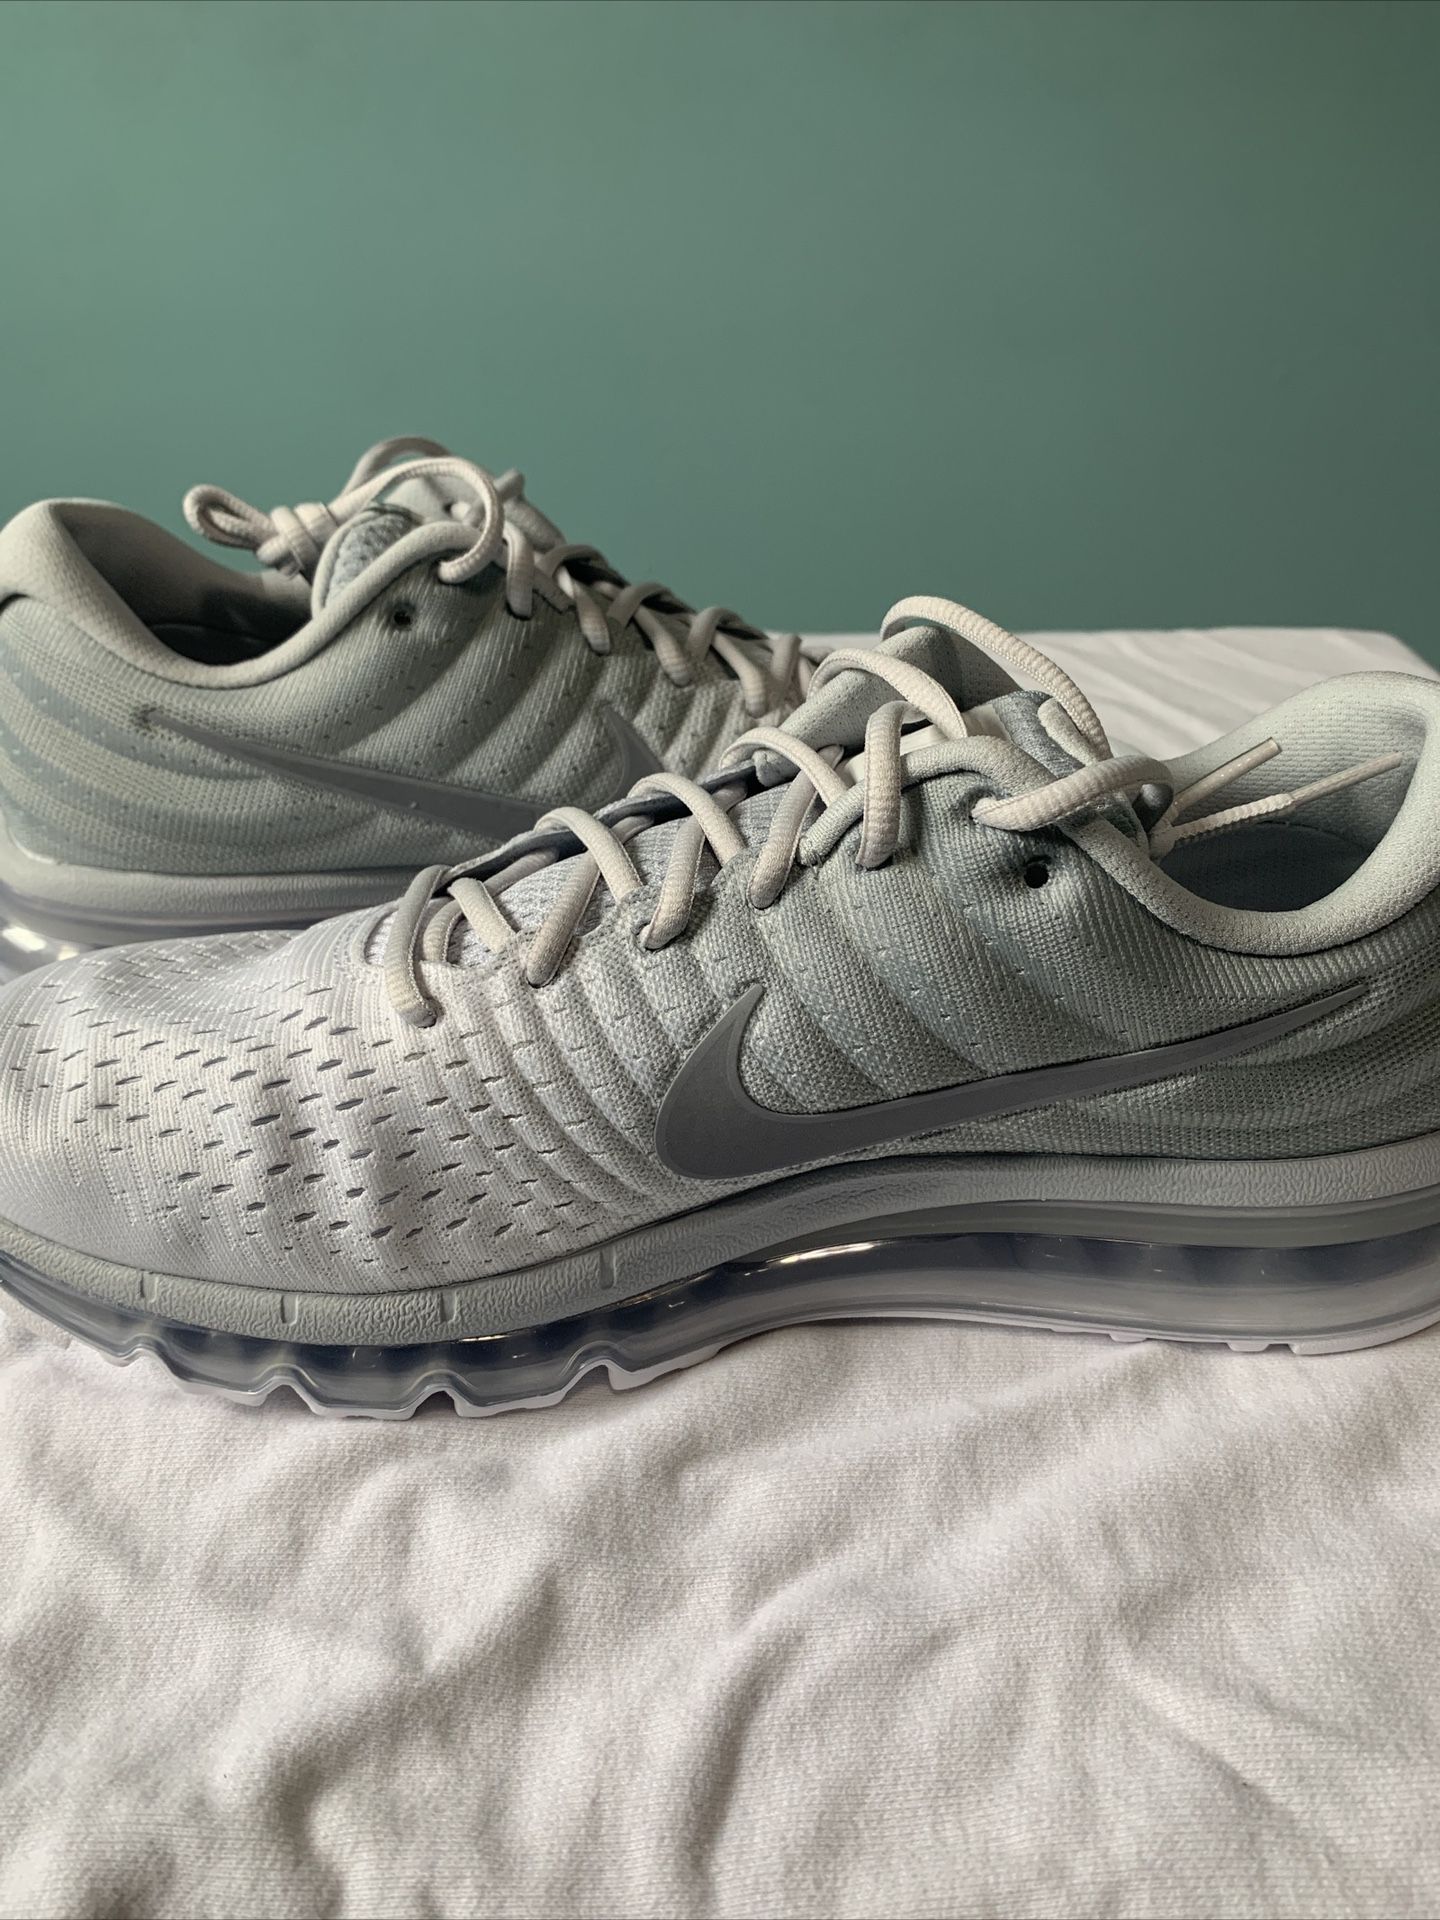 Size 10.5 - Nike Air 2017 Pure Platinum - 849559-009 for Sale in Nashville, TN - OfferUp